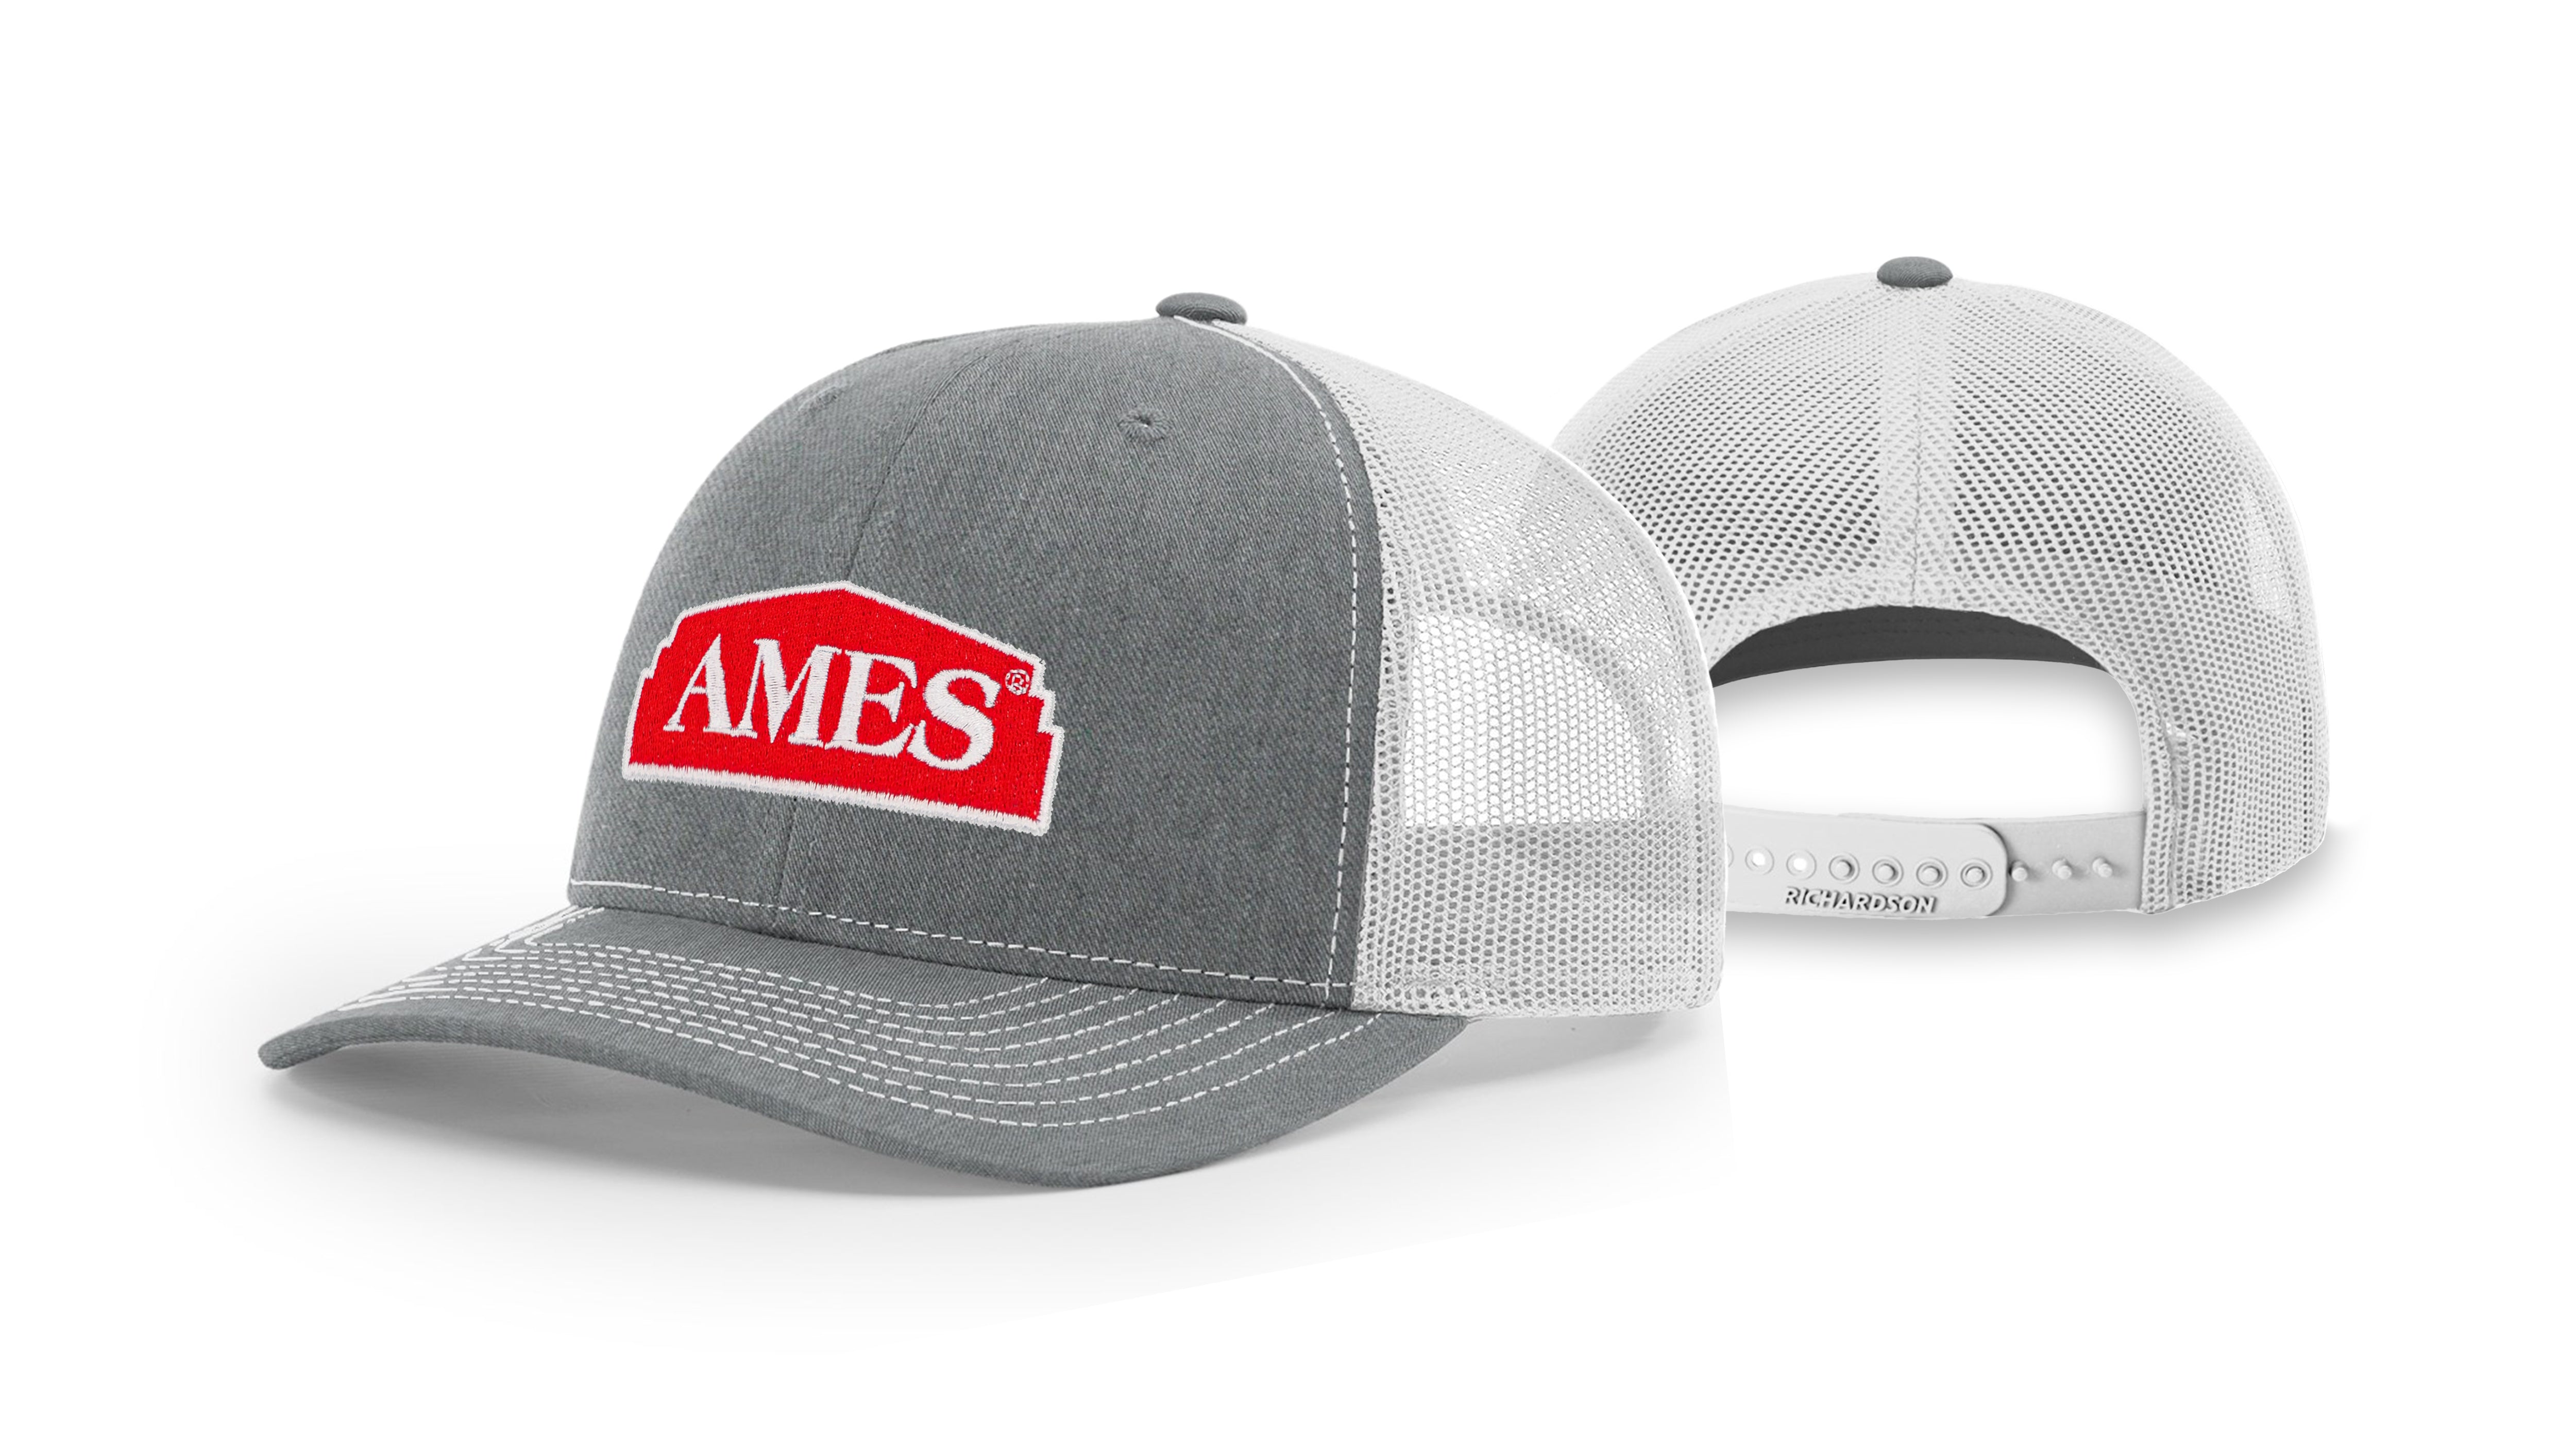 The Ultimate Guide to Custom Trucker Hats